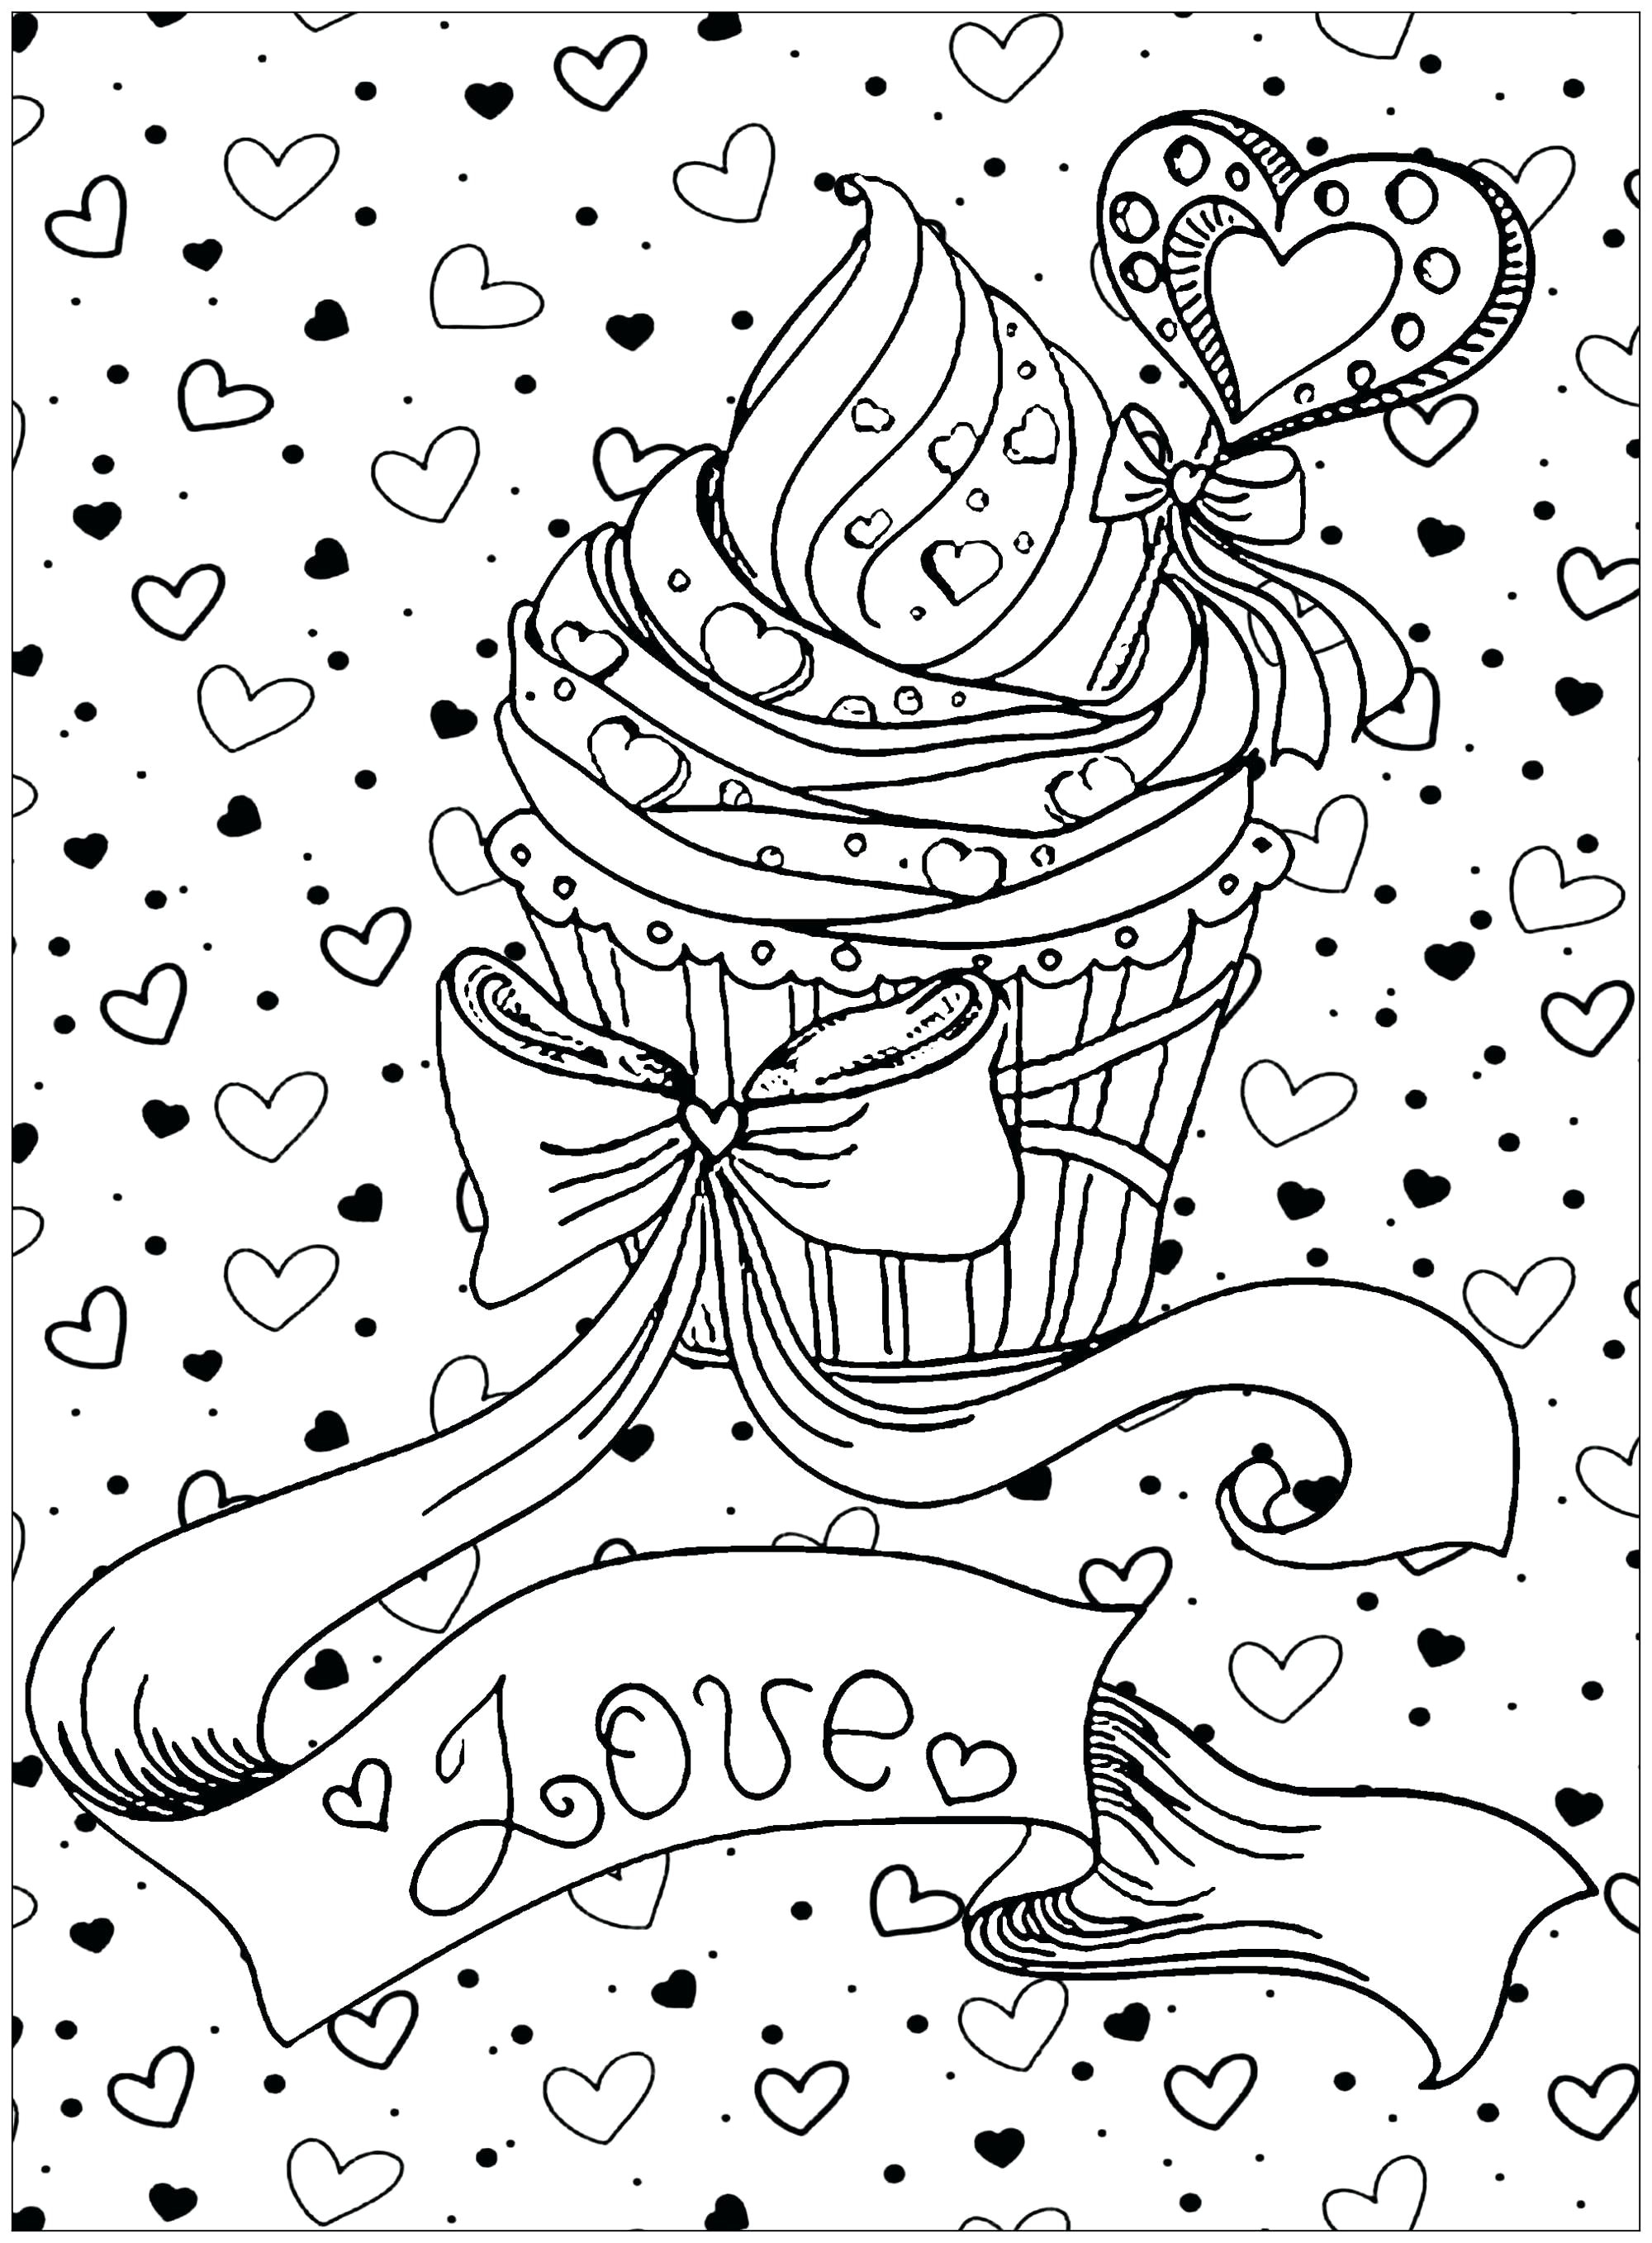 Free Custom Coloring Pages Coloring Pages 41 Awesome Custom Coloring Books Individual Custom